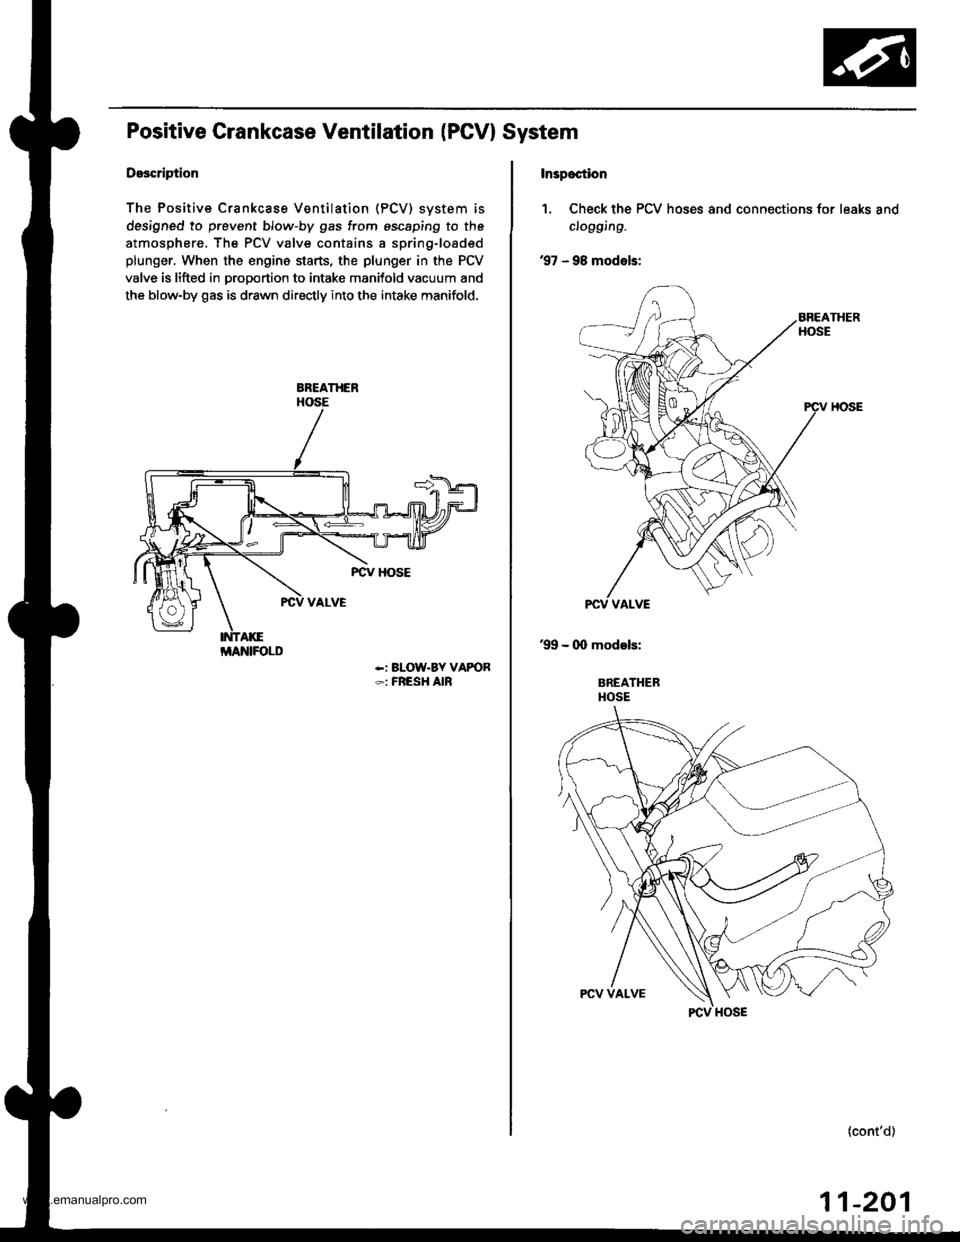 HONDA CR-V 1999 RD1-RD3 / 1.G Workshop Manual 
Positive Grankcase Ventilation (PGVI System
Description
The Positive Crankcase Ventilation (PCV) svstem is
designed to prevent blow-by gas from escaping to the
atmosphere. The PCV valve contains a sp